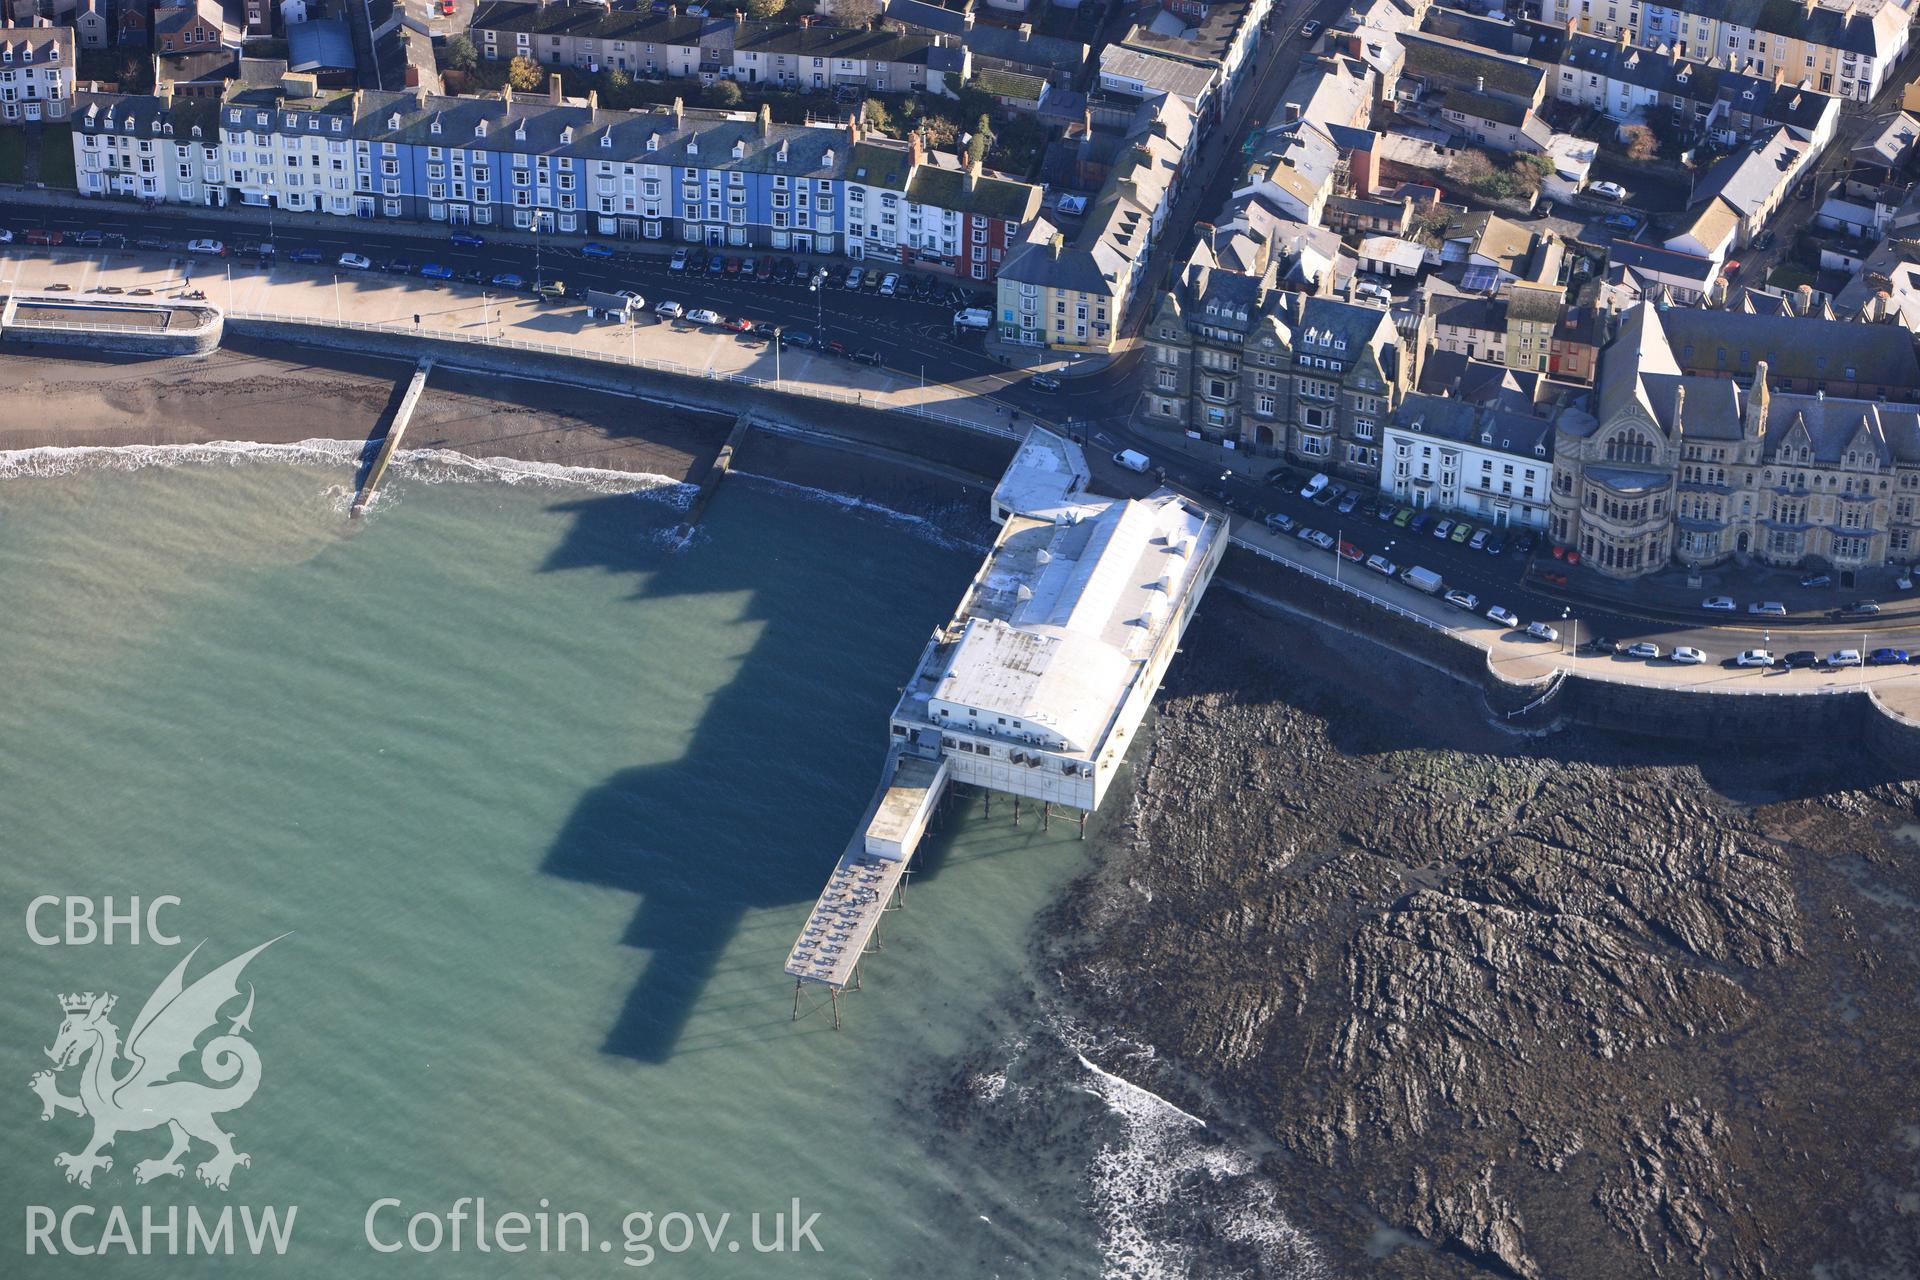 RCAHMW colour oblique photograph of Aberystwyth Pier. Taken by Toby Driver on 05/11/2012.